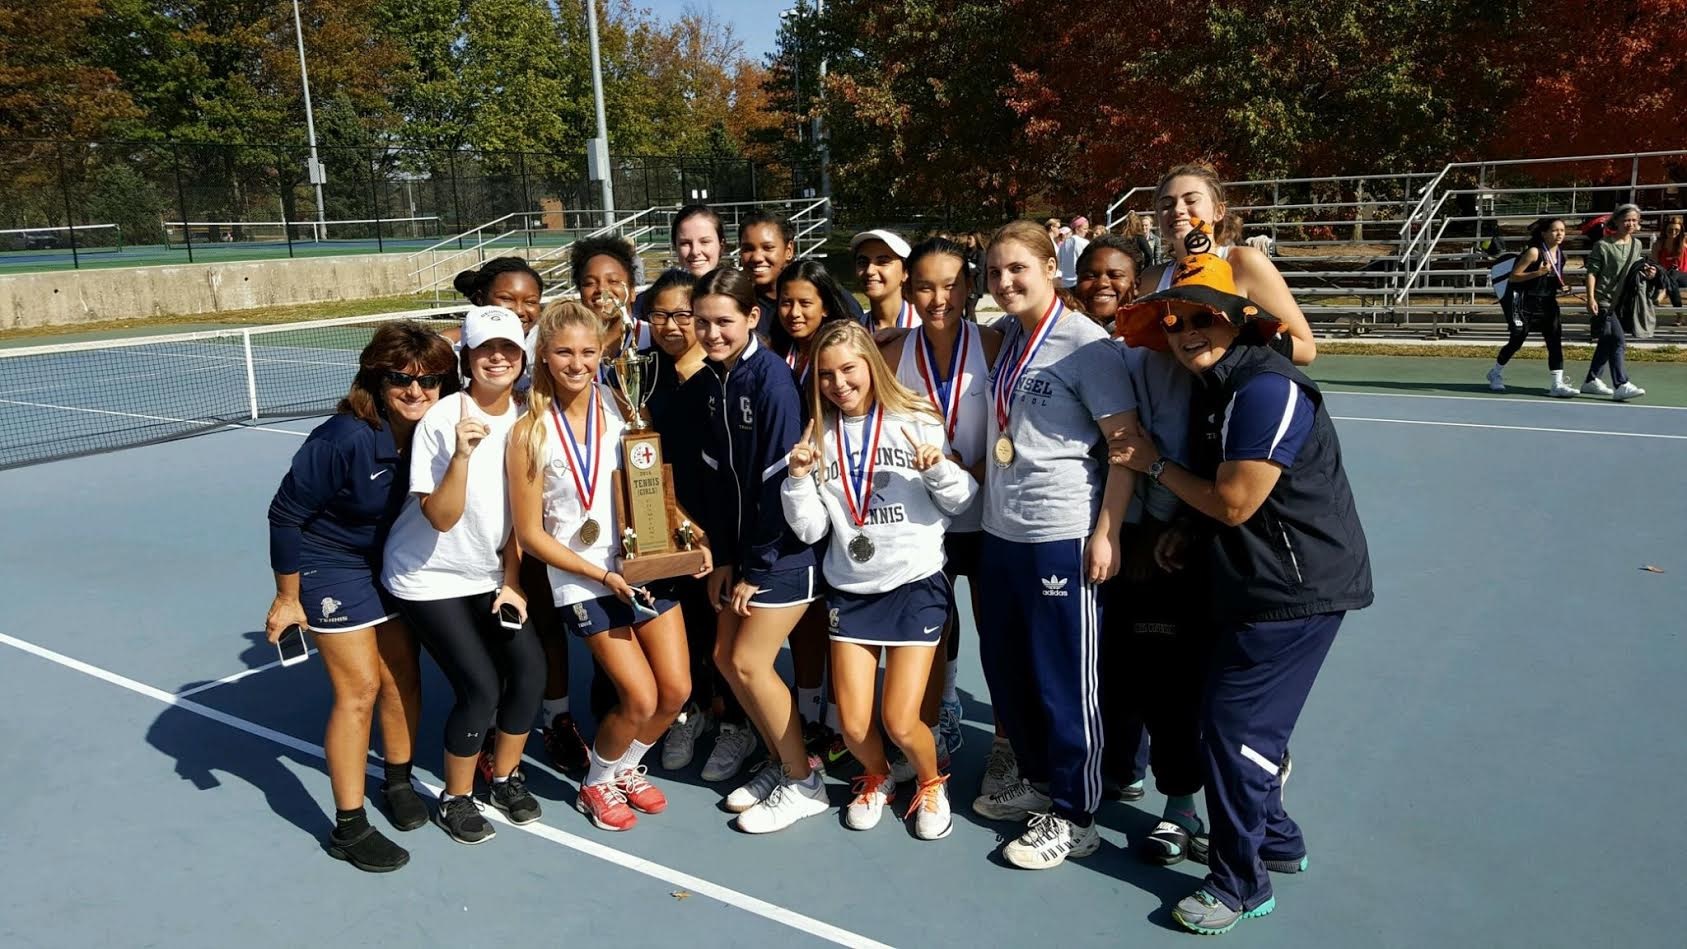 Good Counsel looks to defend their 2016 Girl's Tennis Title this weekend.